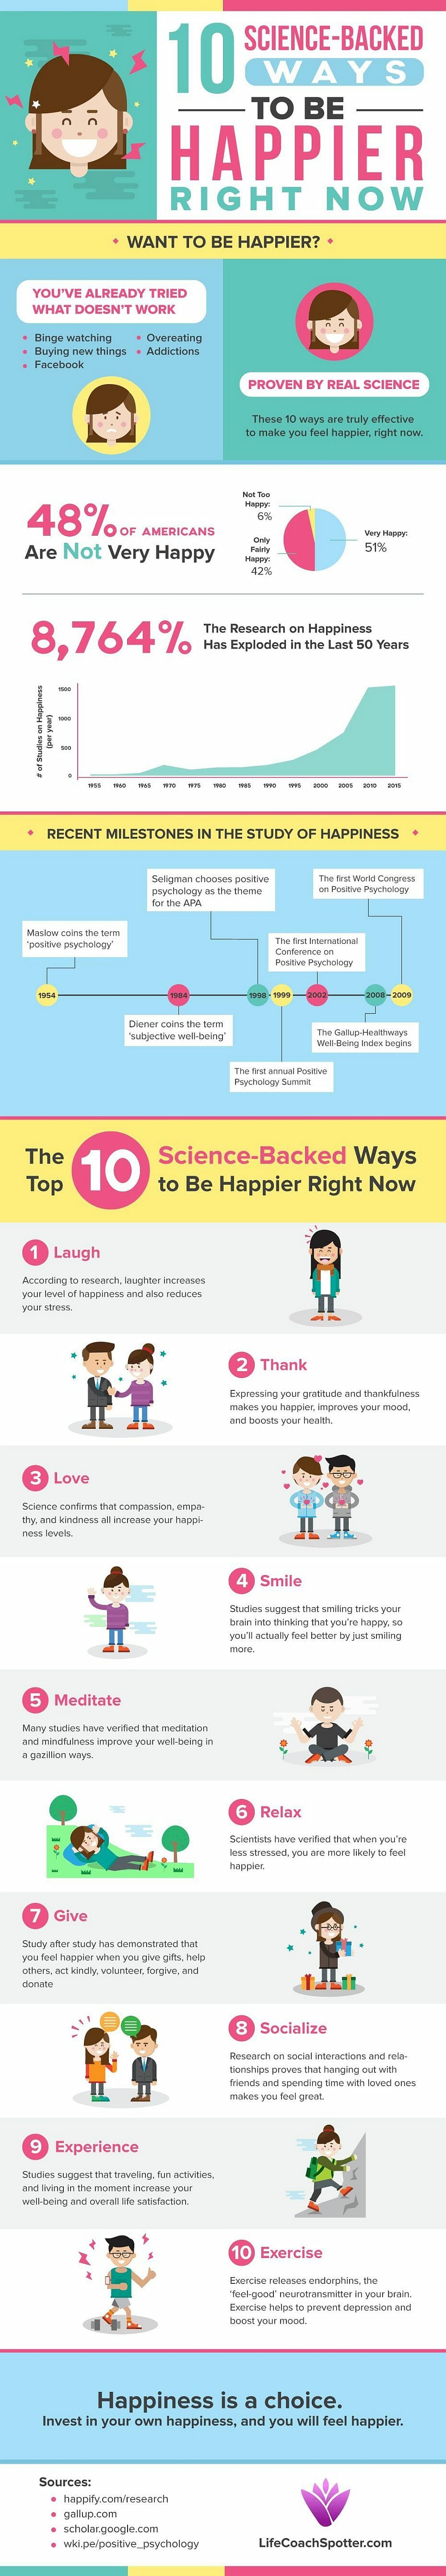 10 ways to be happier